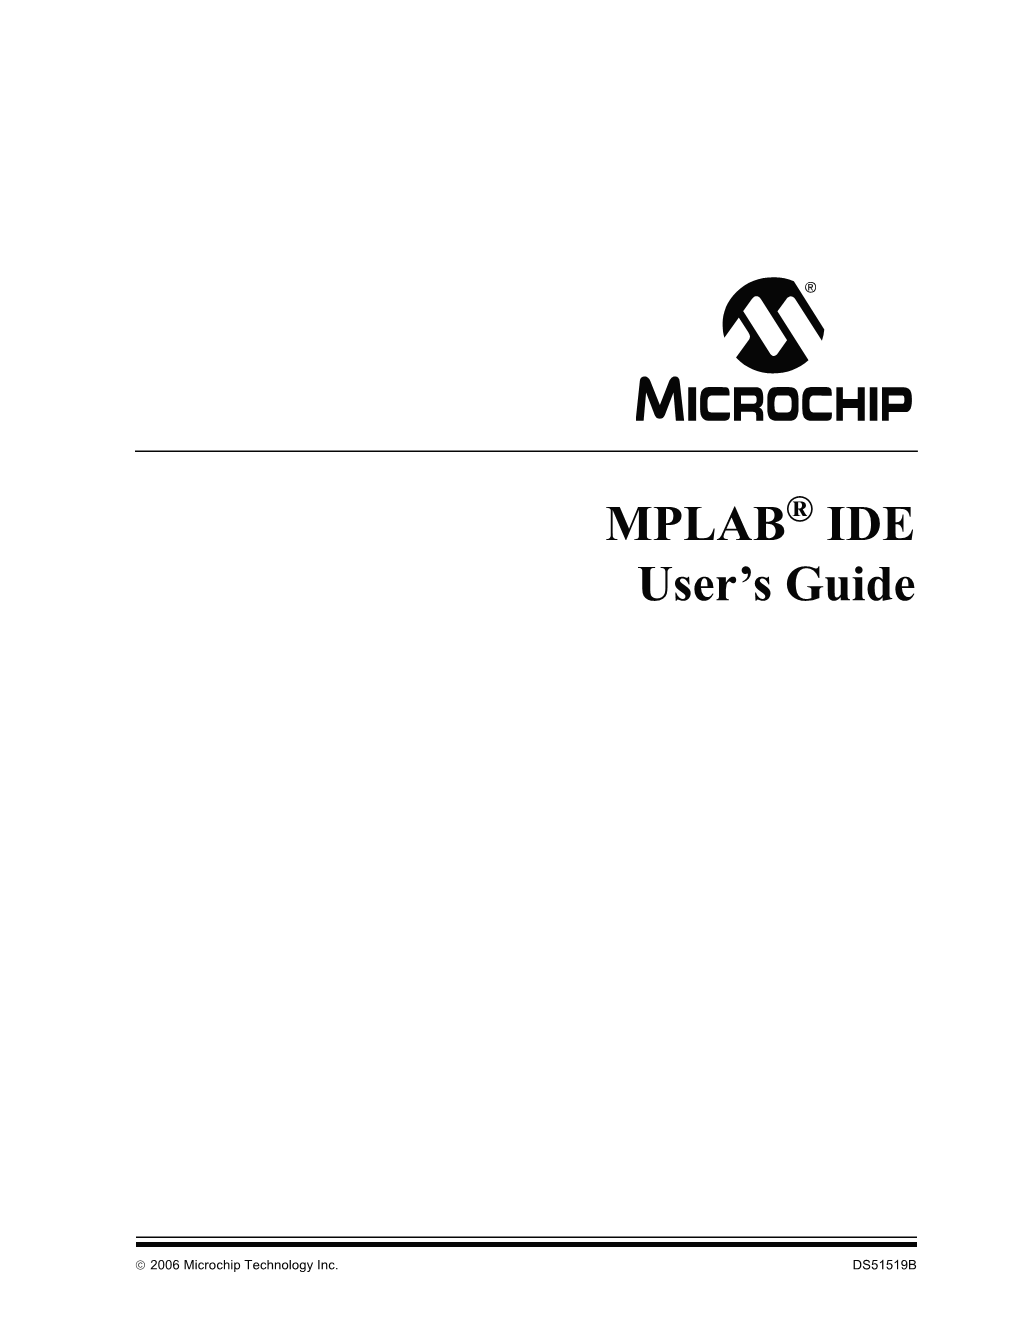 MPLAB IDE User's Guide